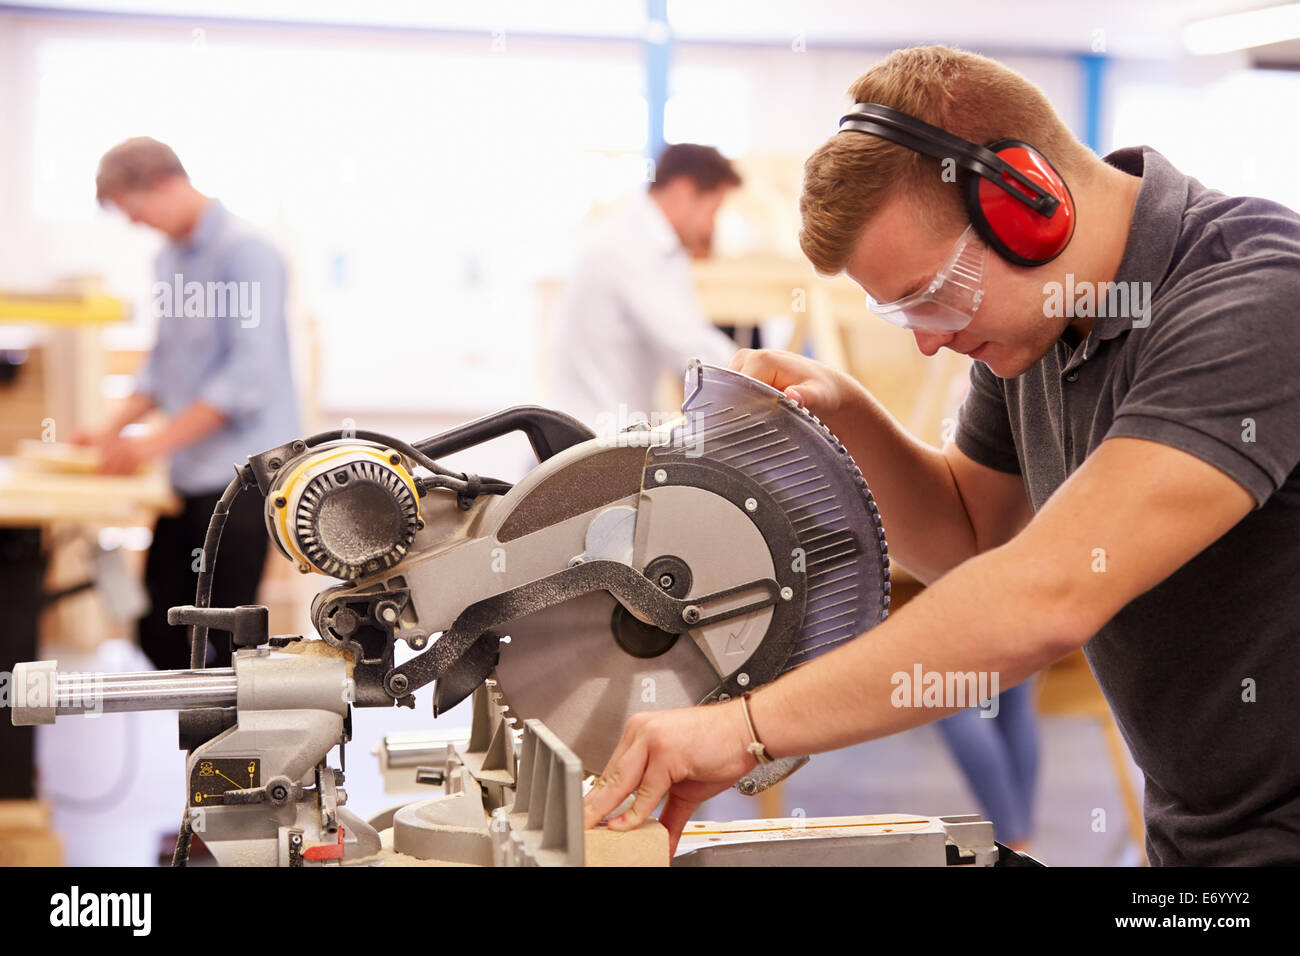 Student In Carpentry Class Using Circular Saw Stock Photo